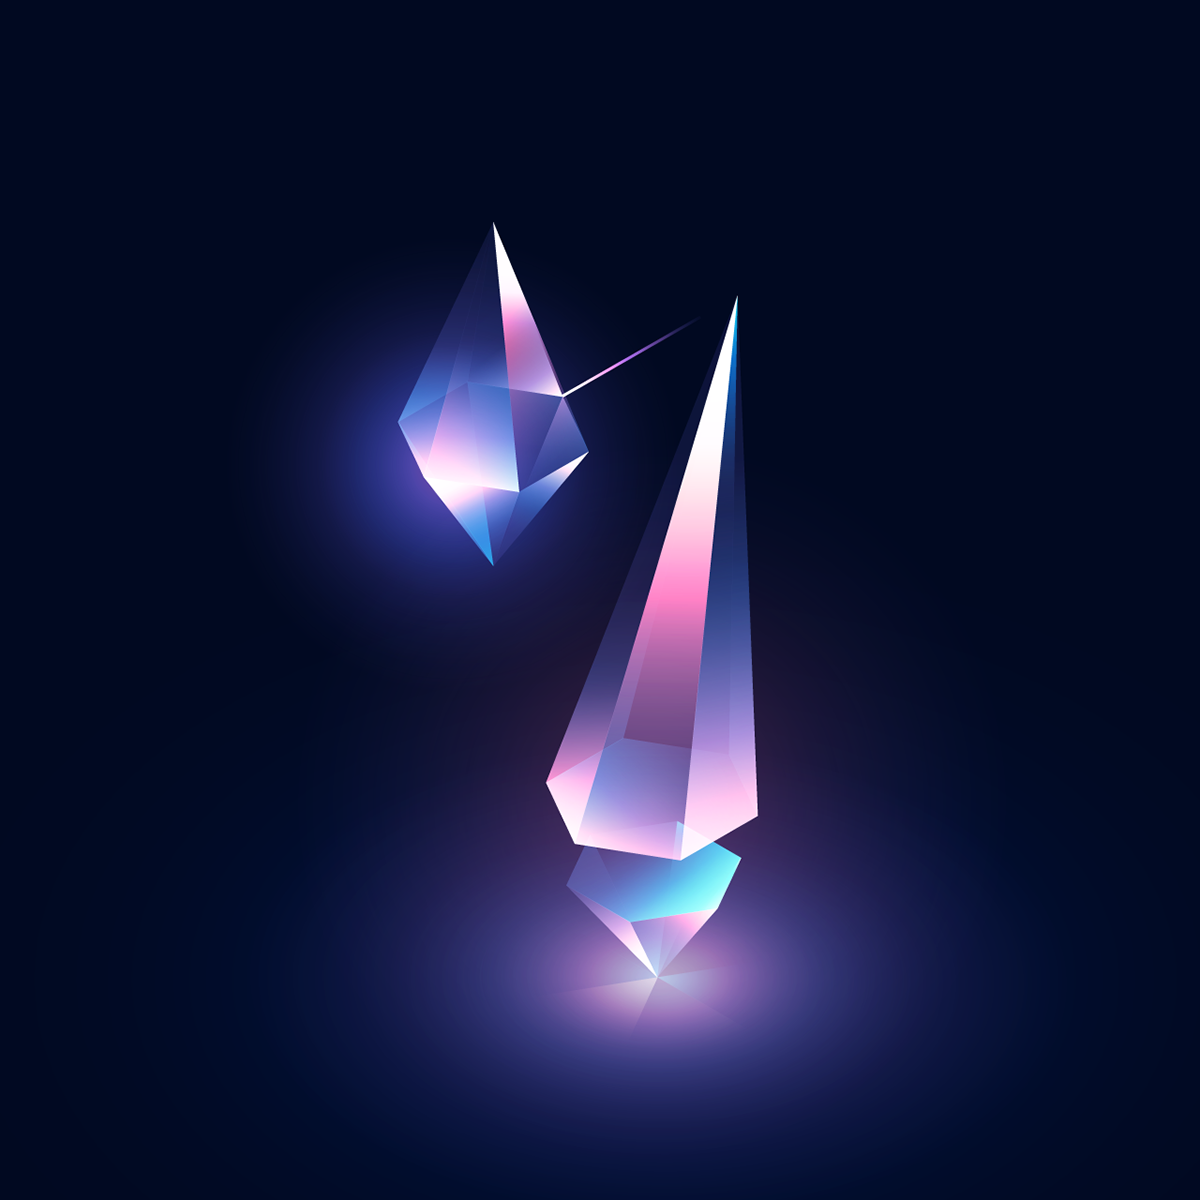 36daysoftype diamonds colors lights cosmos typography   36days Space  geometry